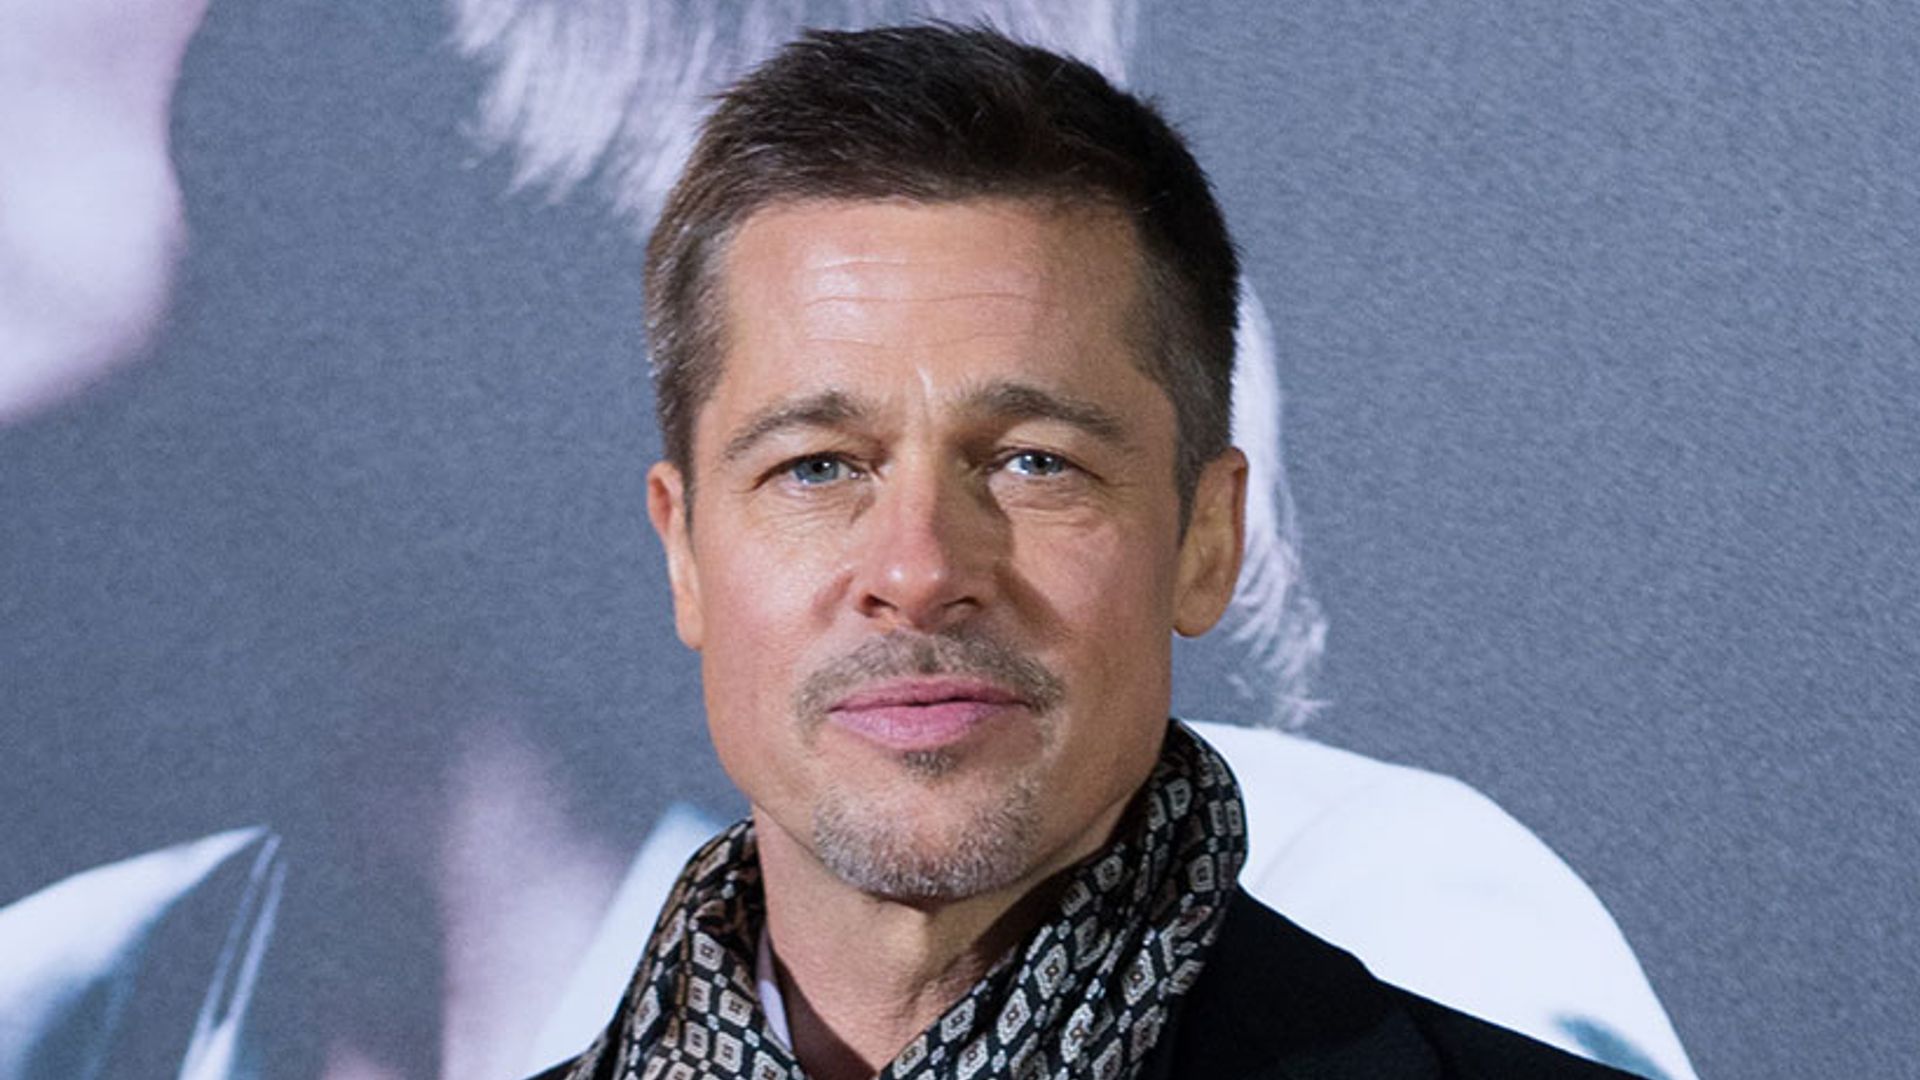 Brad Pitt dealt new blow in ongoing legal battle with ex Angelina Jolie 8  years after split